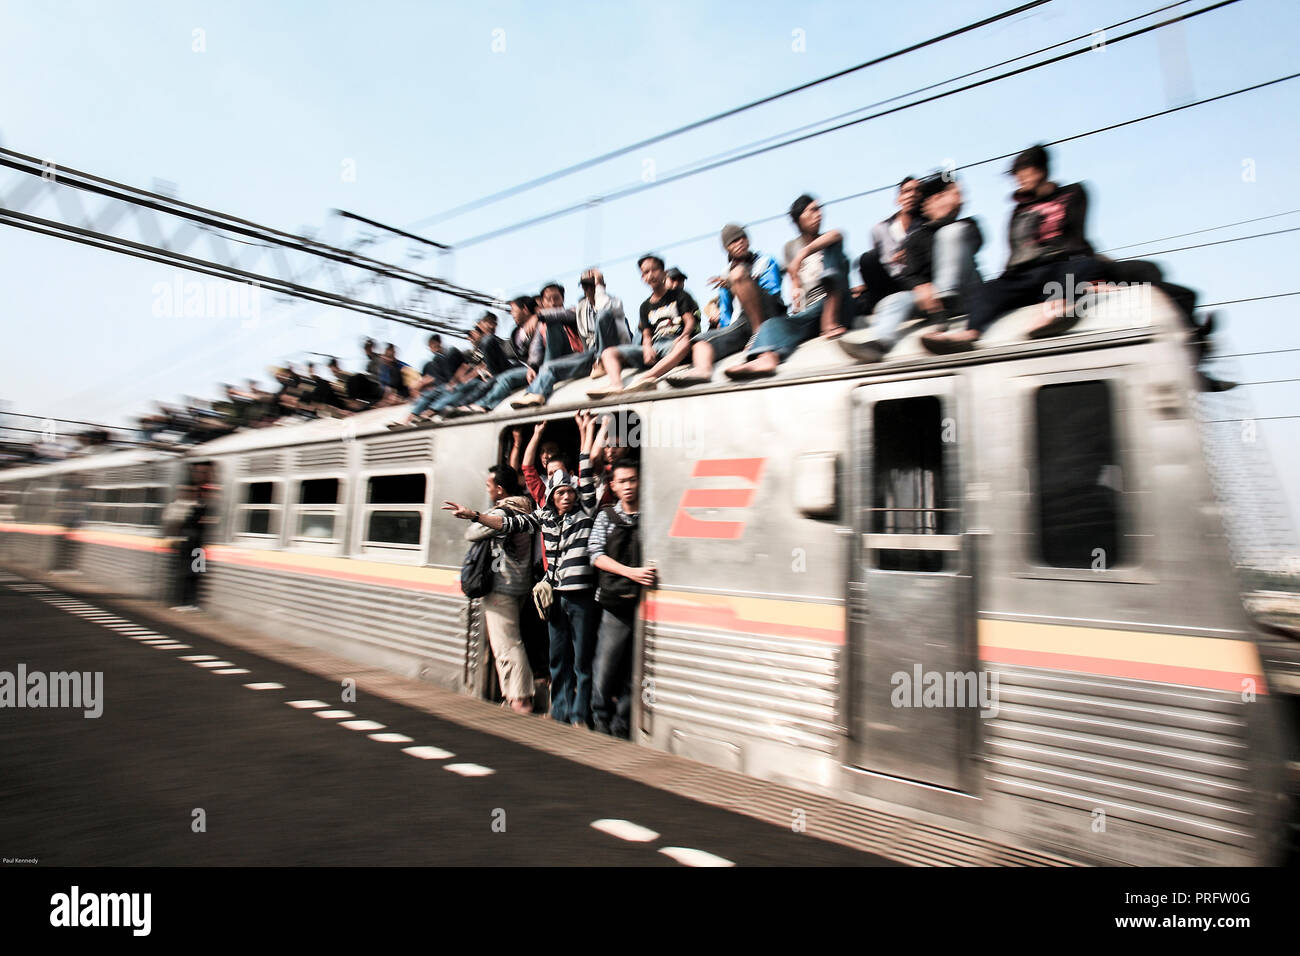 Young men riding on top of crowded Mass Rapid Transit train in Jakarta, Java, Indonesia Stock Photo